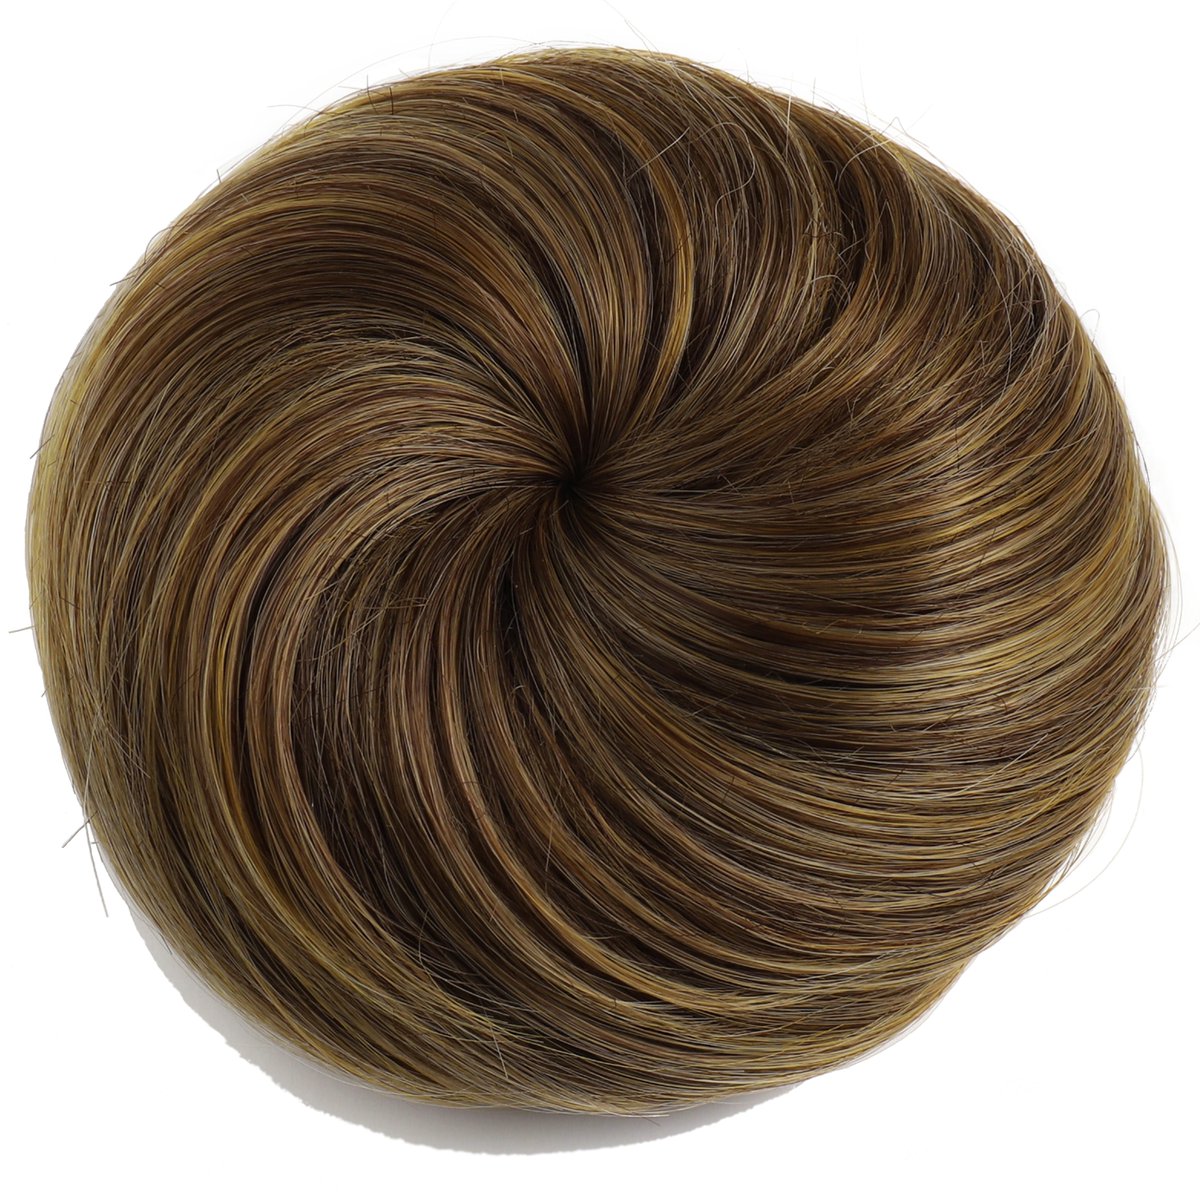 Excited to share the latest addition to my #etsy shop: Synthetic Clip In Hair Bun Extension Donut Chignon Hairpiece Wig (R1416T#) etsy.me/44rizBX #brown #hairextension #ponytailextension #hairpieces #syntheticclip #donutchignon #wig #hairbun #hairbang